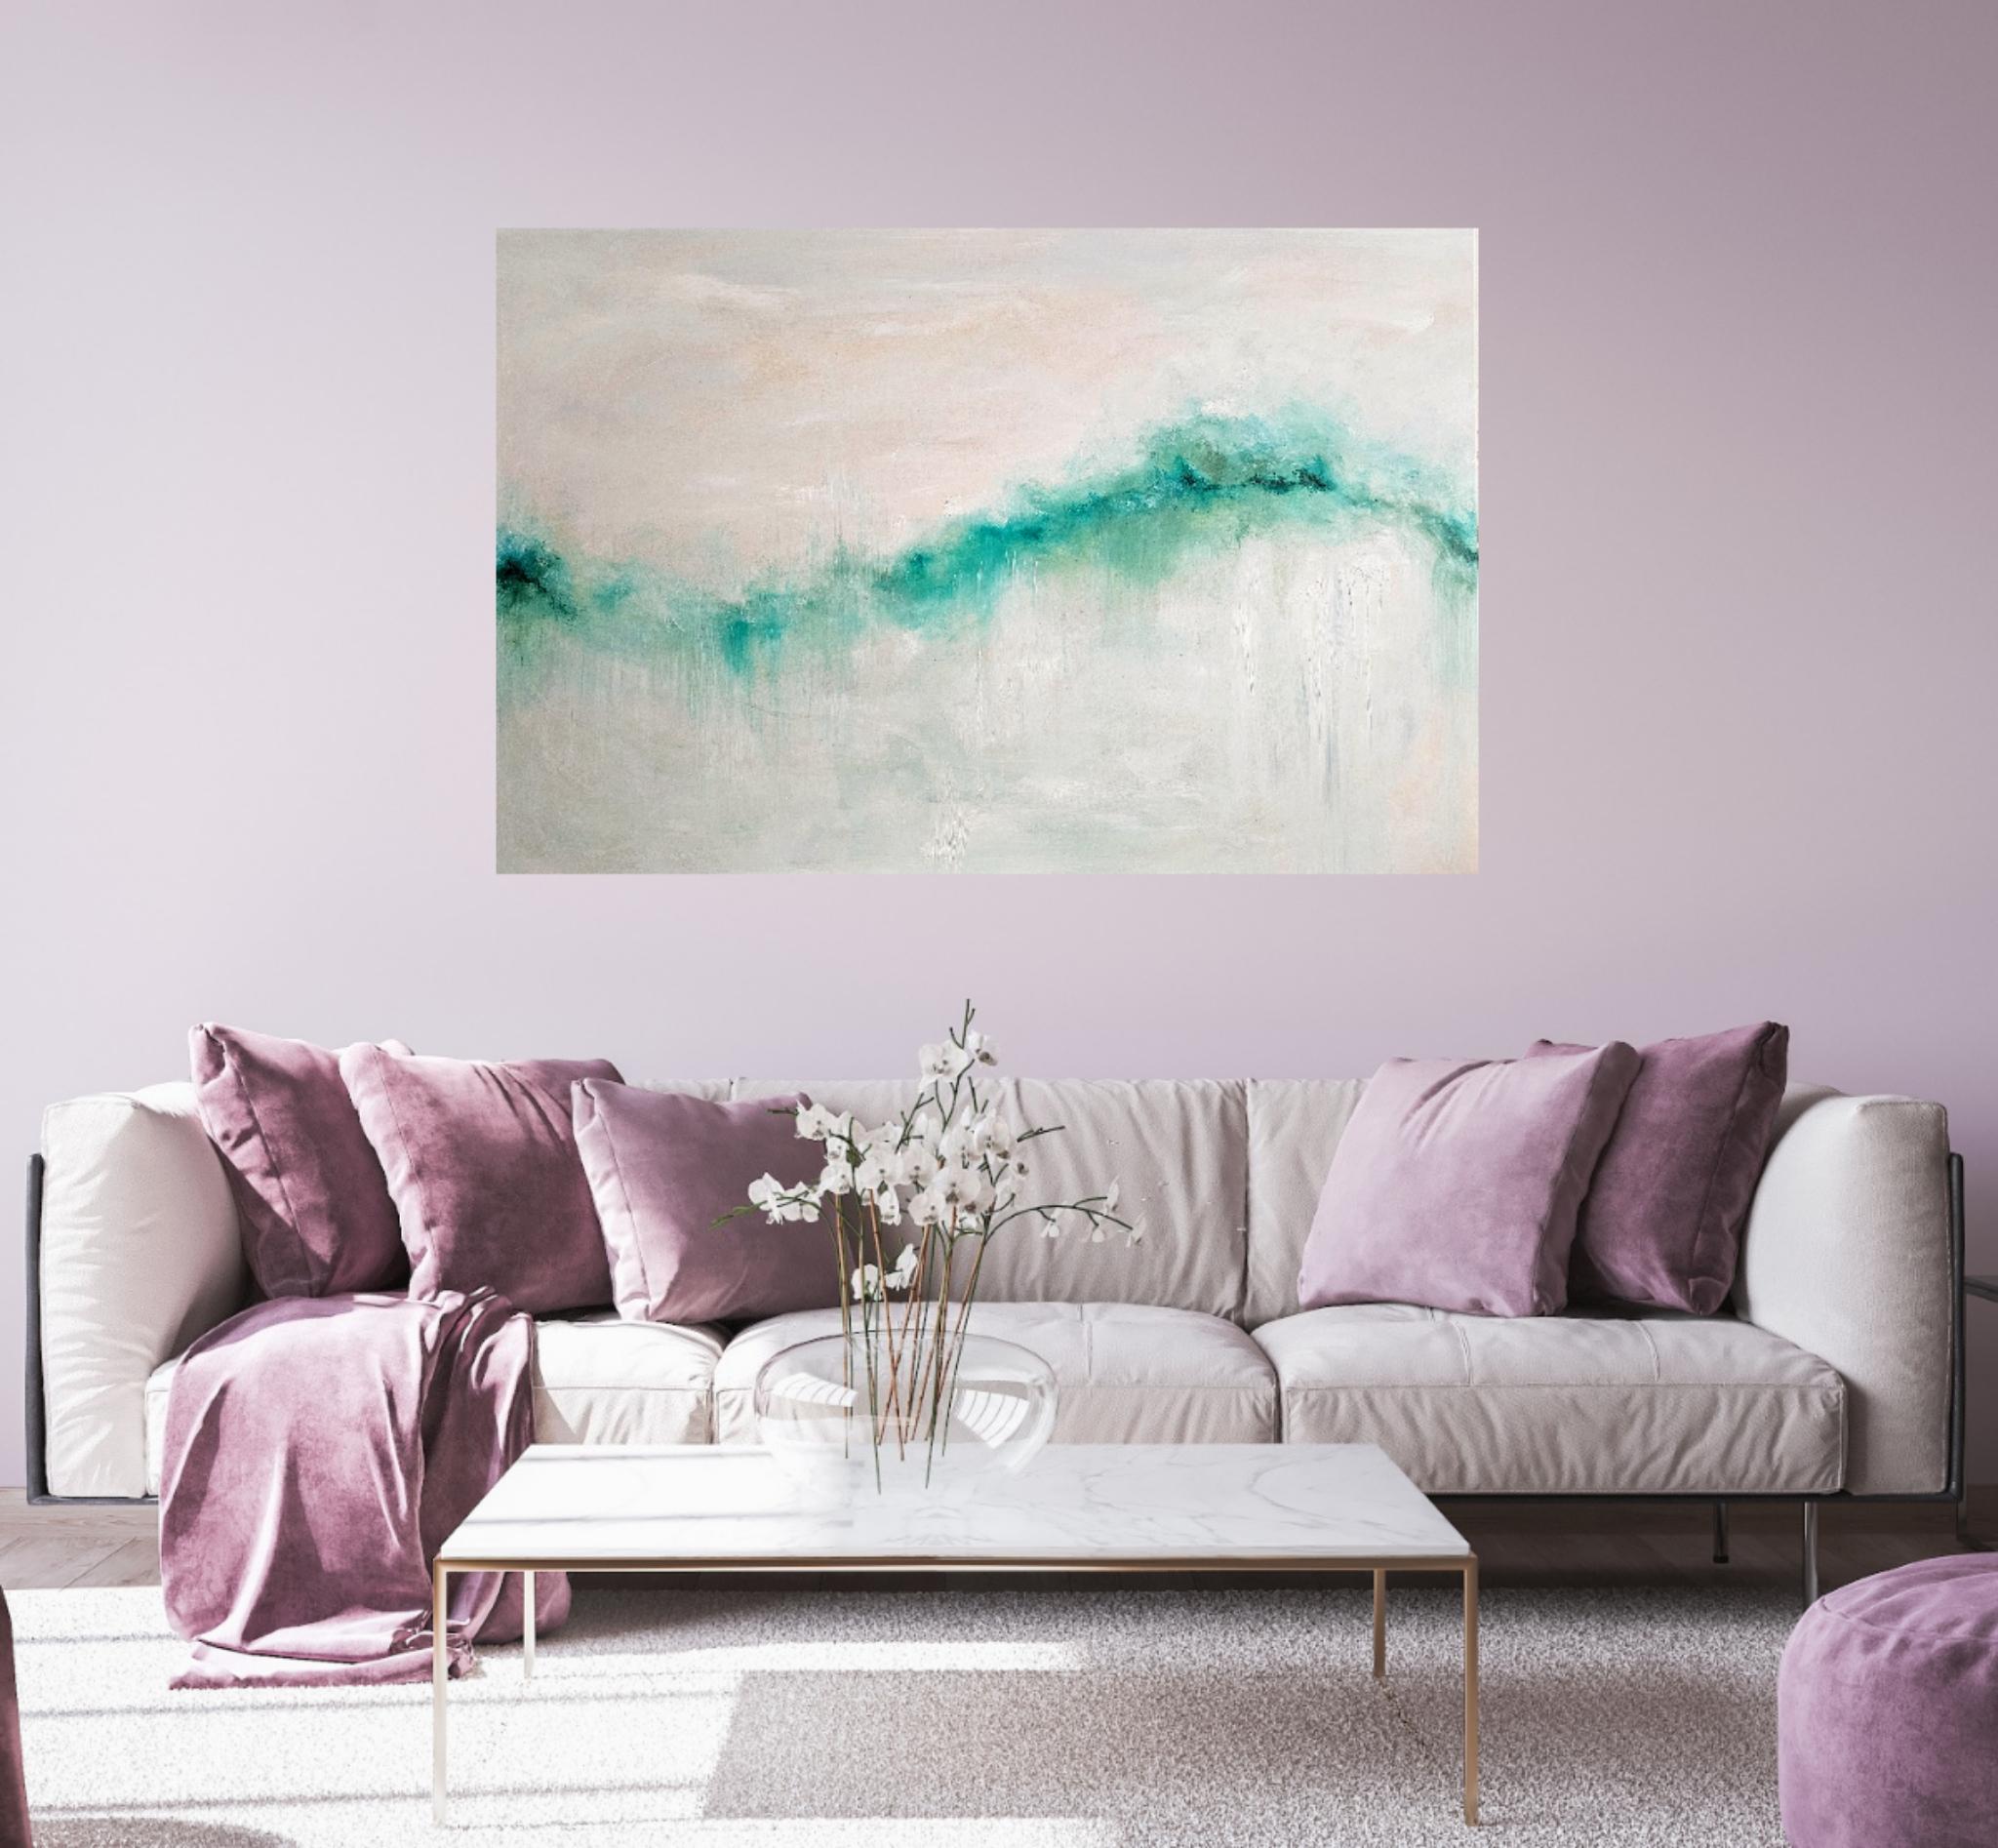 I dreamt of the sea - Large abstract seascape painting For Sale 7